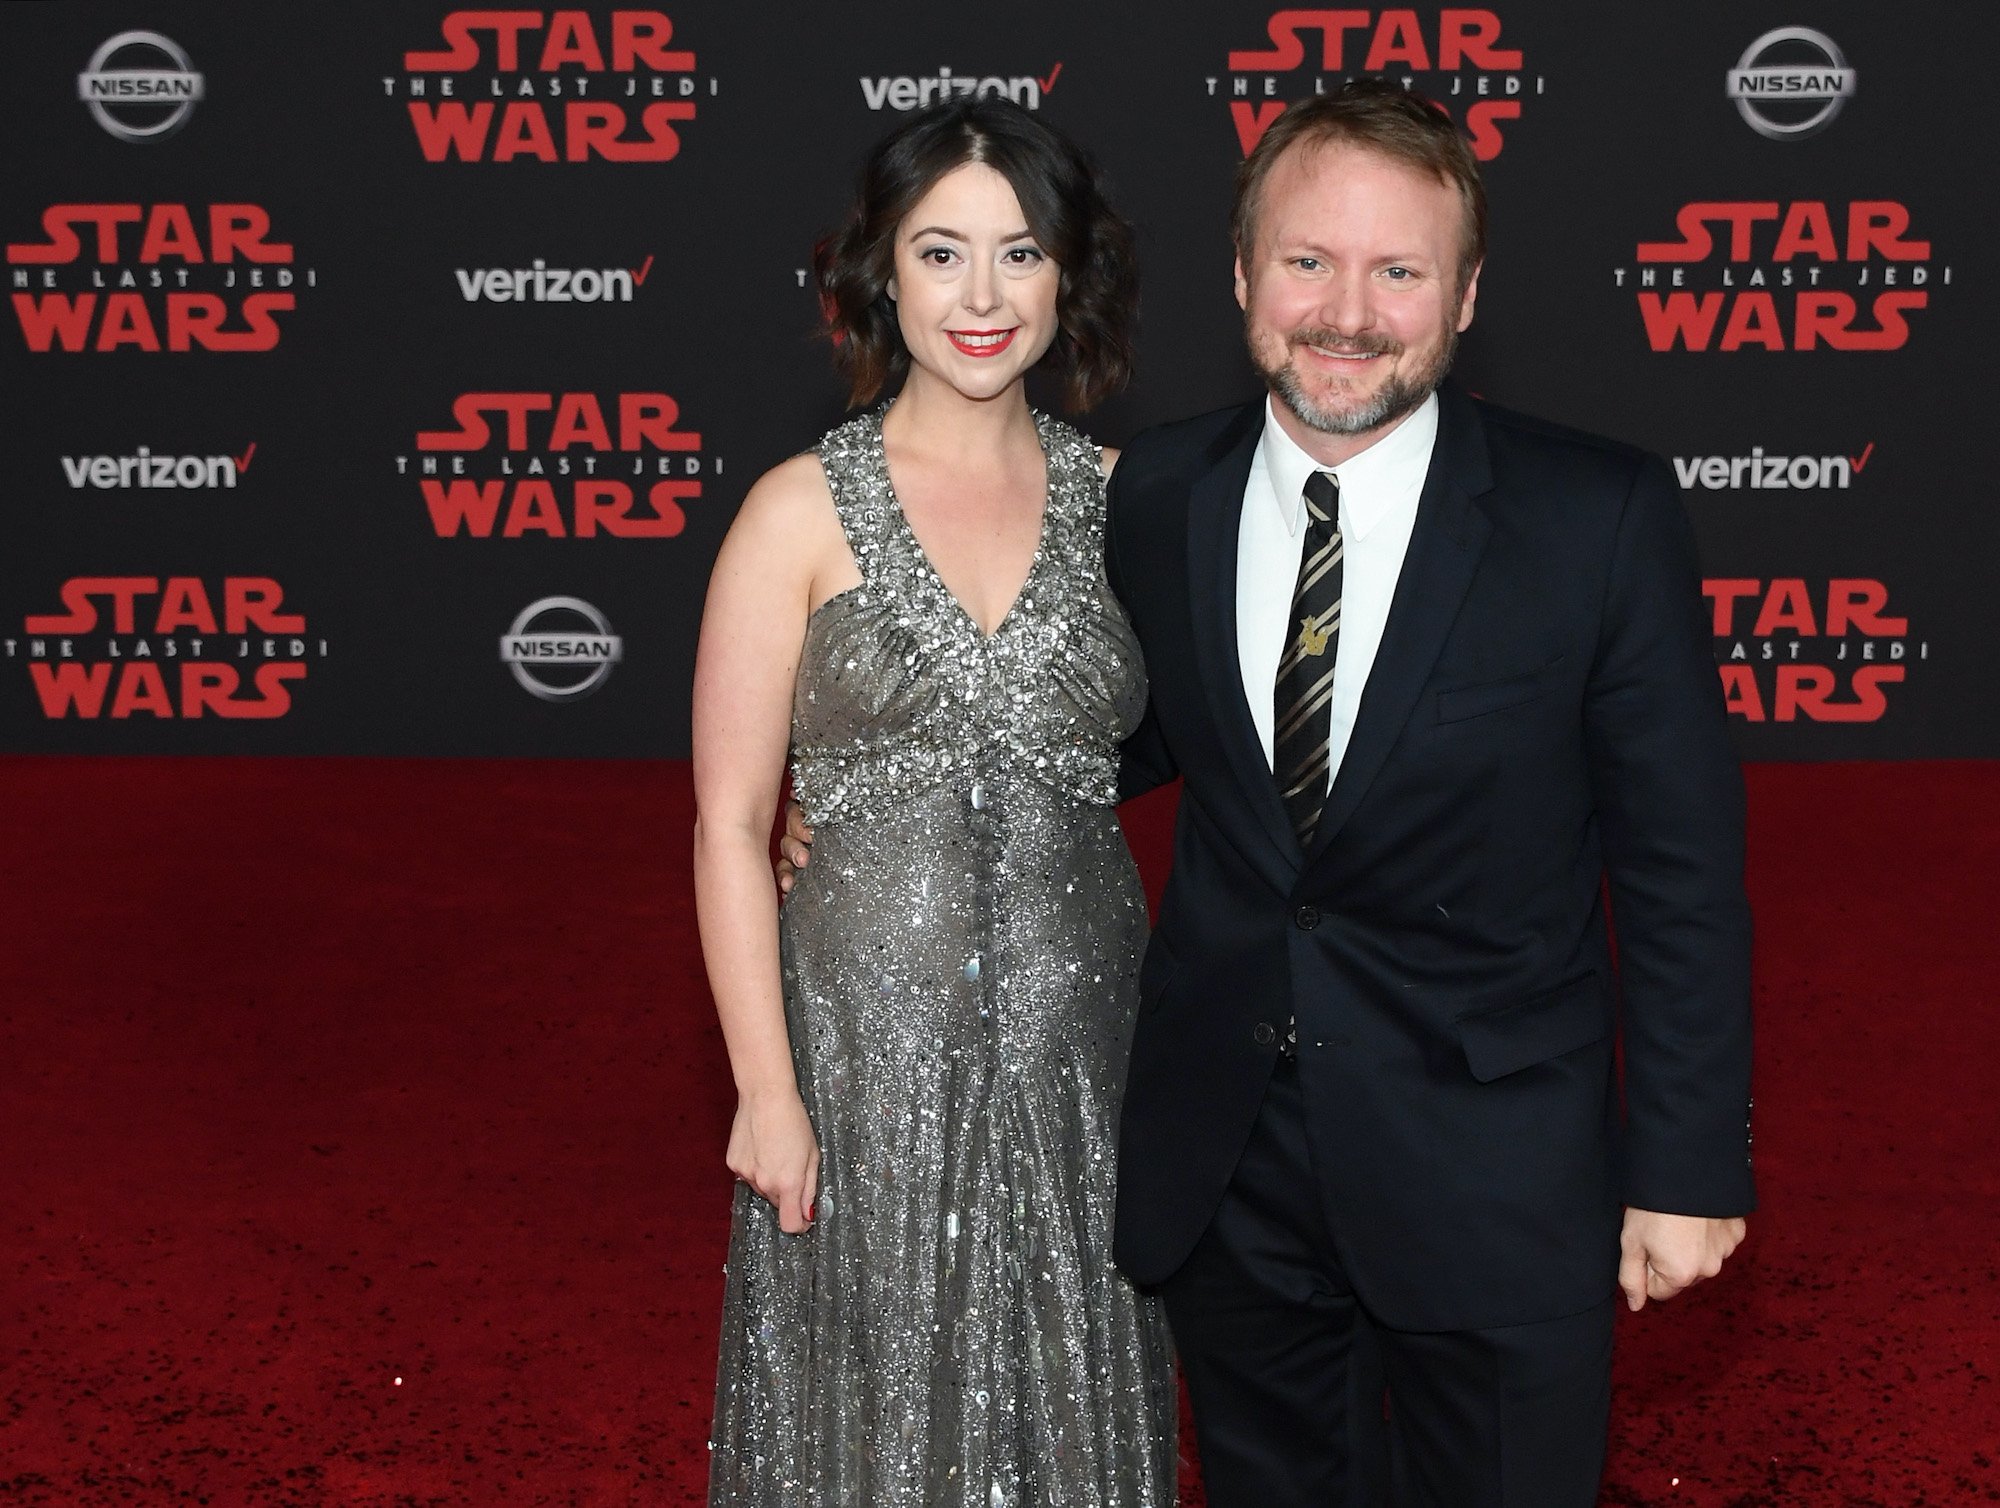 Star Wars: The Last Jedi' Director Rian Johnson to Appear at